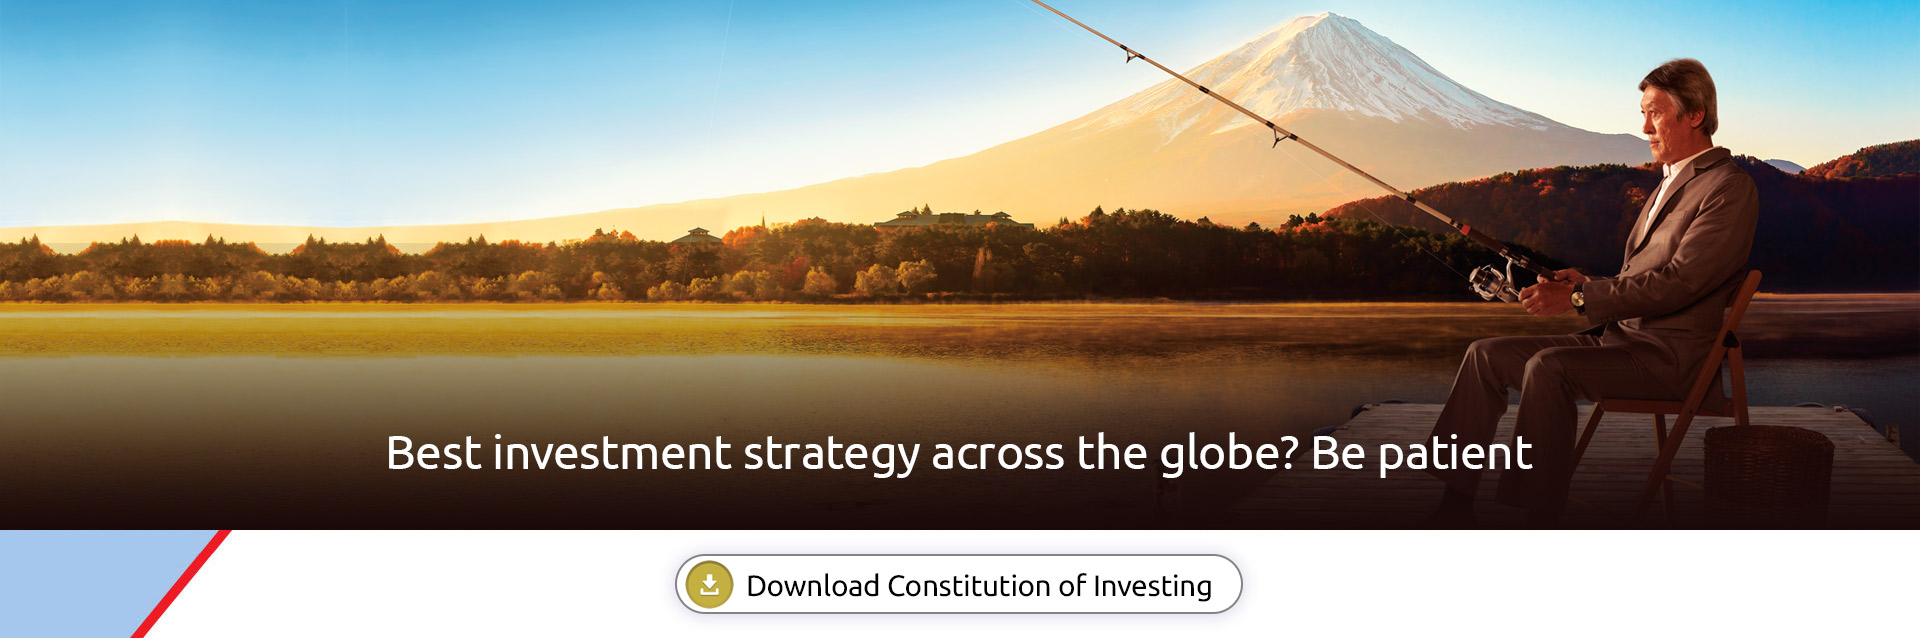 Constitution of Investing - Nippon India Mutual Funds